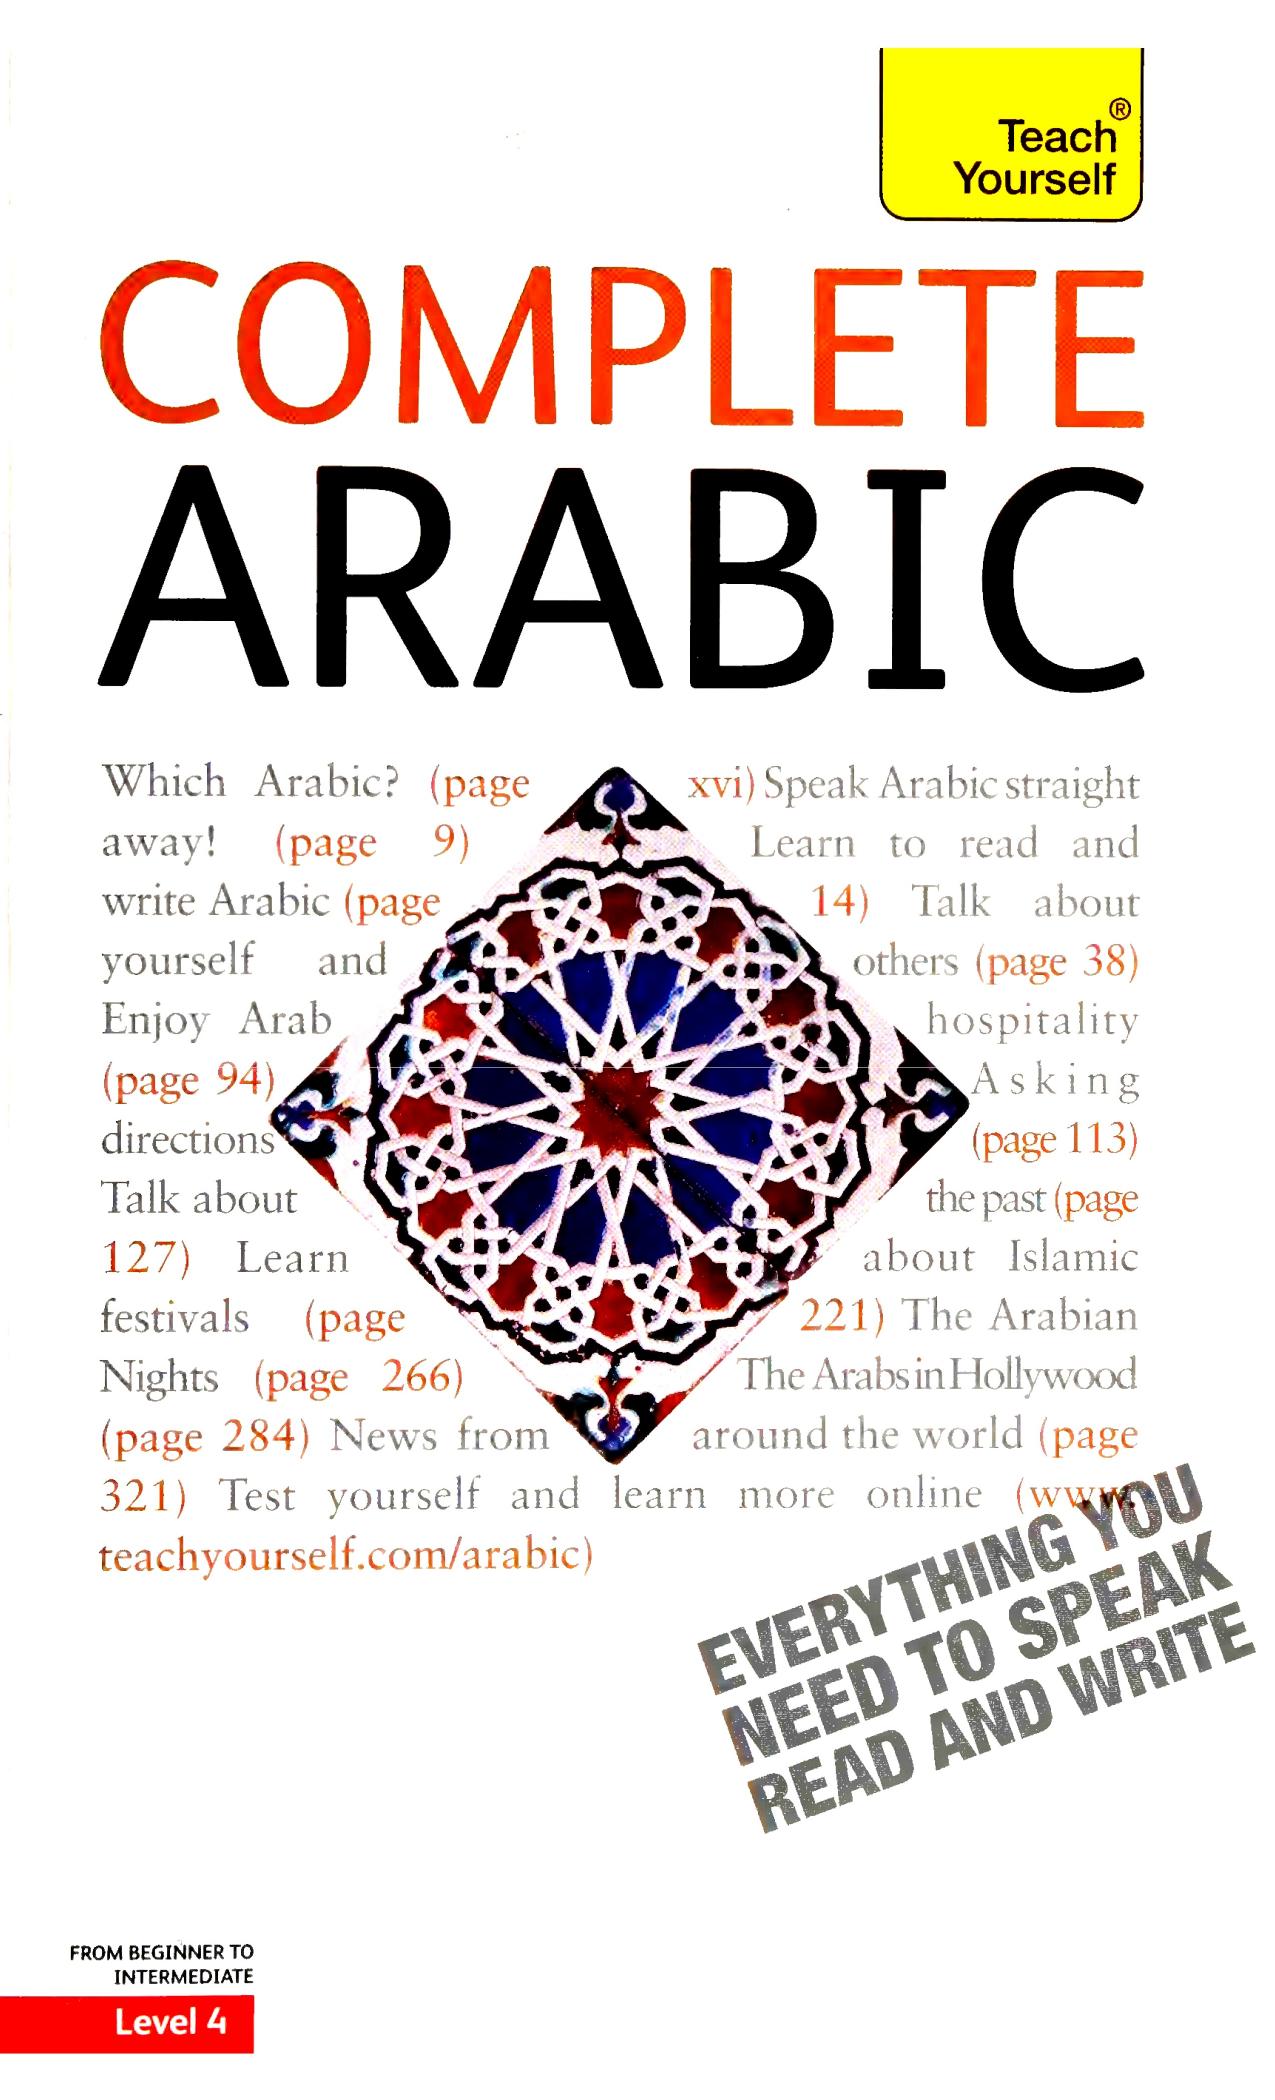 Complete Arabic: A Teach Yourself Guide (Teach Yourself Language) by Jack Smart Frances Altorfer